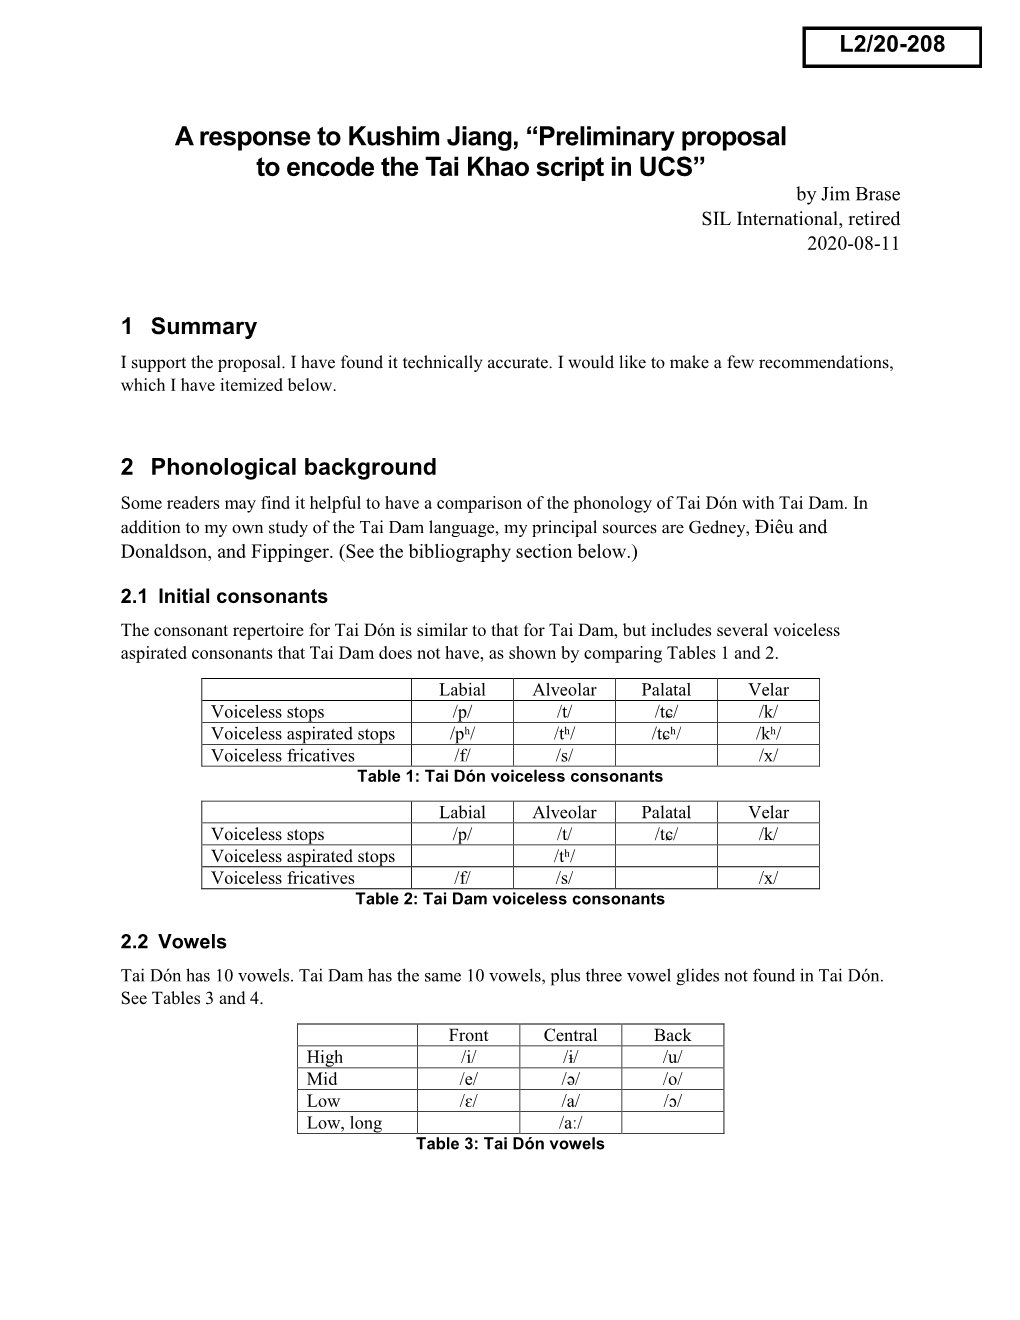 Preliminary Proposal to Encode the Tai Khao Script in UCS” by Jim Brase SIL International, Retired 2020-08-11